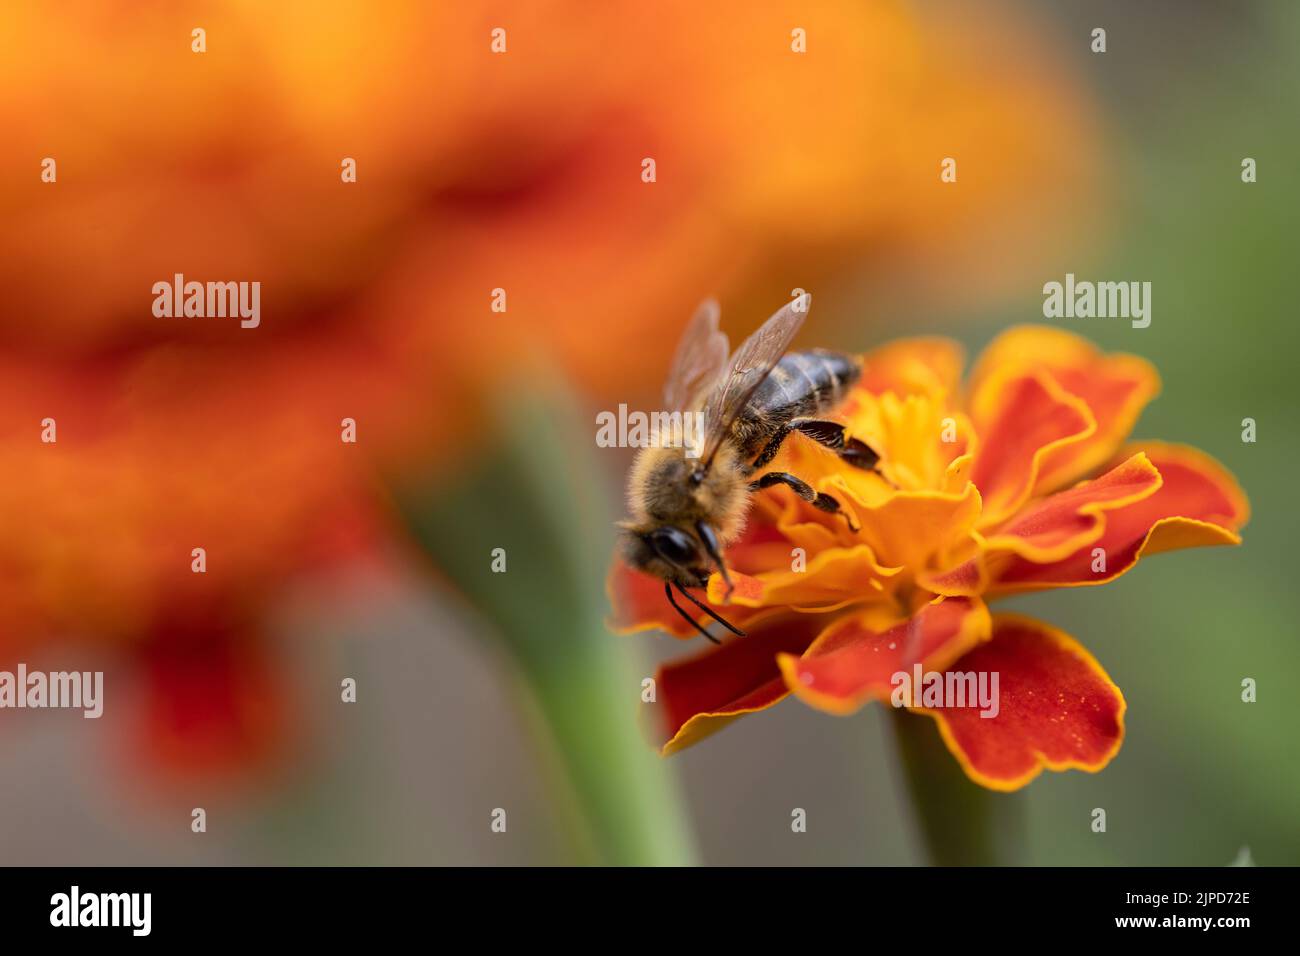 a bee collecting pollen from a flower. Marigold flower (Tagetes patula L.) close up, macro photo Stock Photo